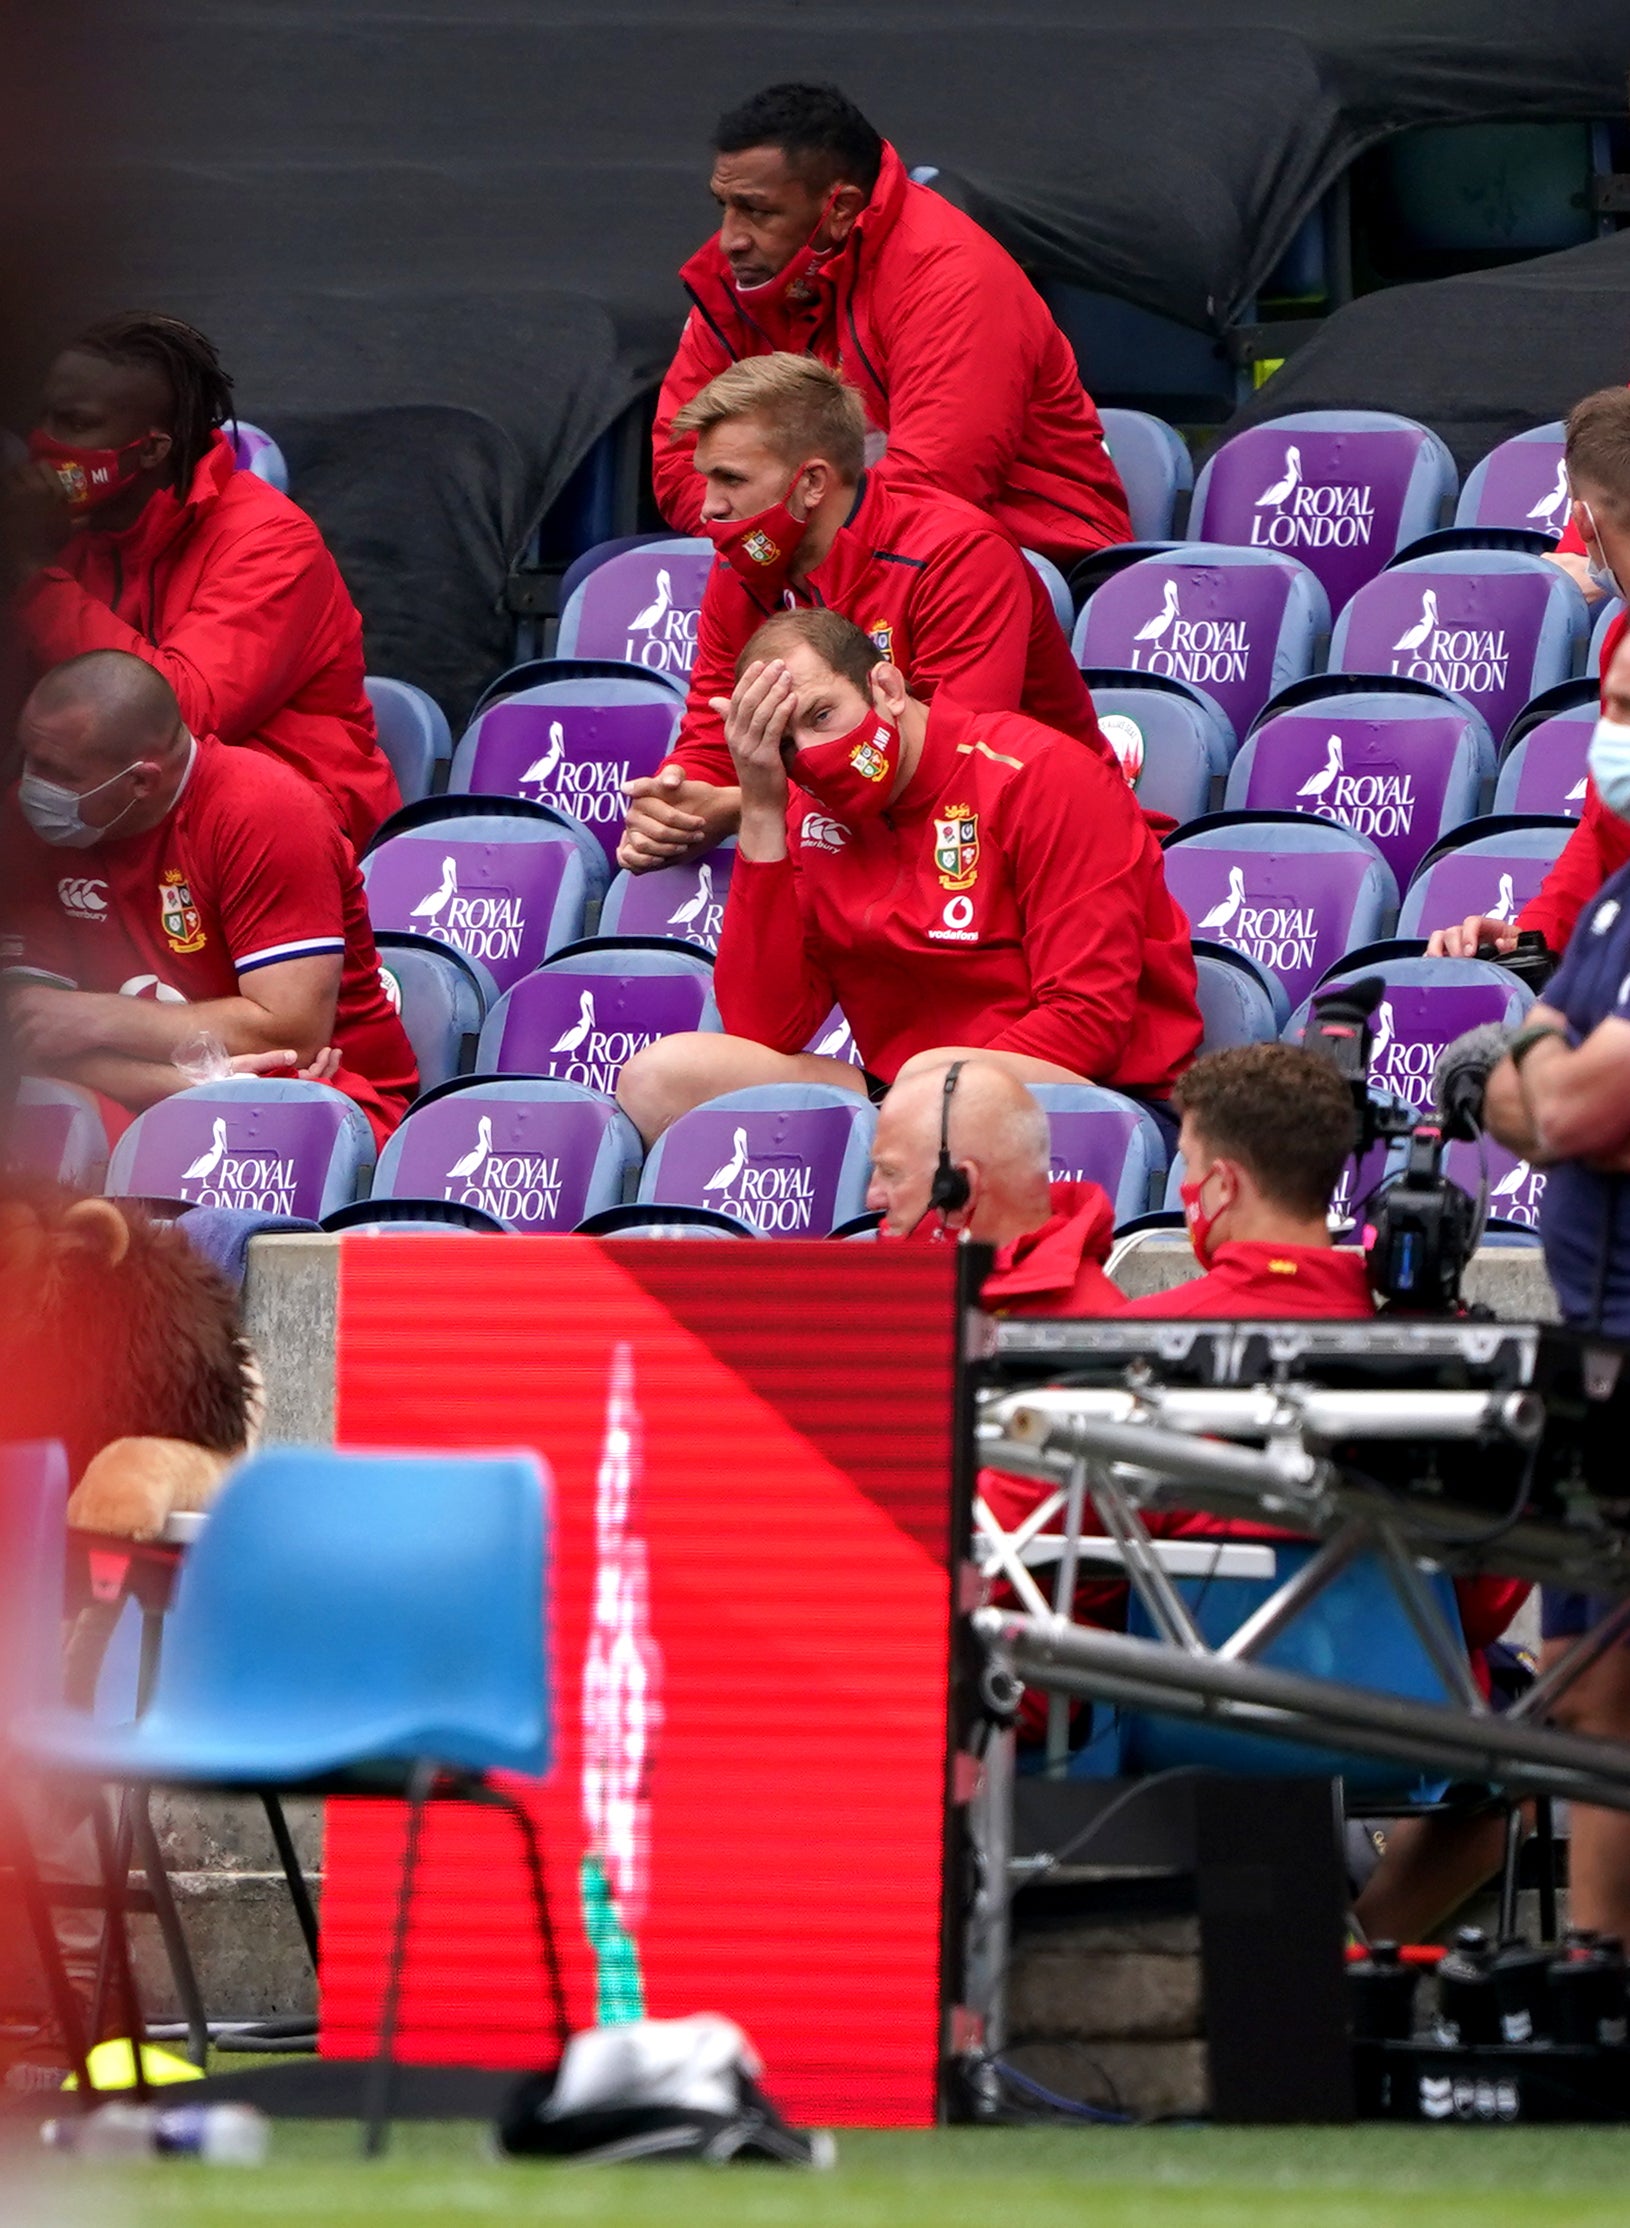 British and Irish Lions captain Alun Wyn Jones sits on the bench after suffering a dislocated shoulder against Japan